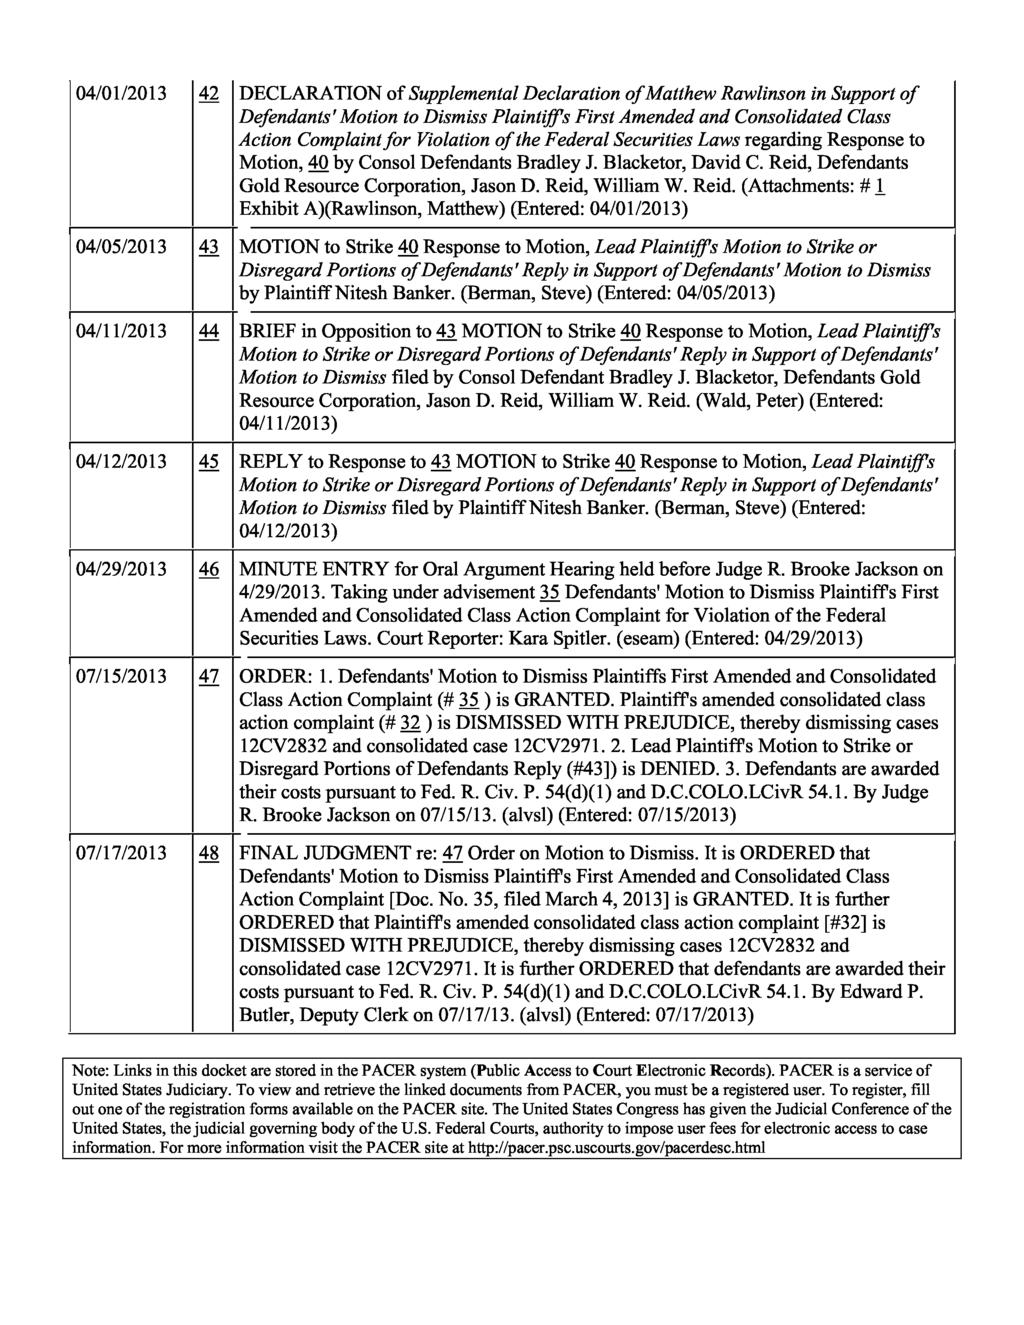 04/01/2013 42 DECLARATION of Supplemental Declaration of in Support of Defendants' Motion to Dismiss Plaintiff's First Amended and Consolidated Class Action Complaint for Violation of the Federal